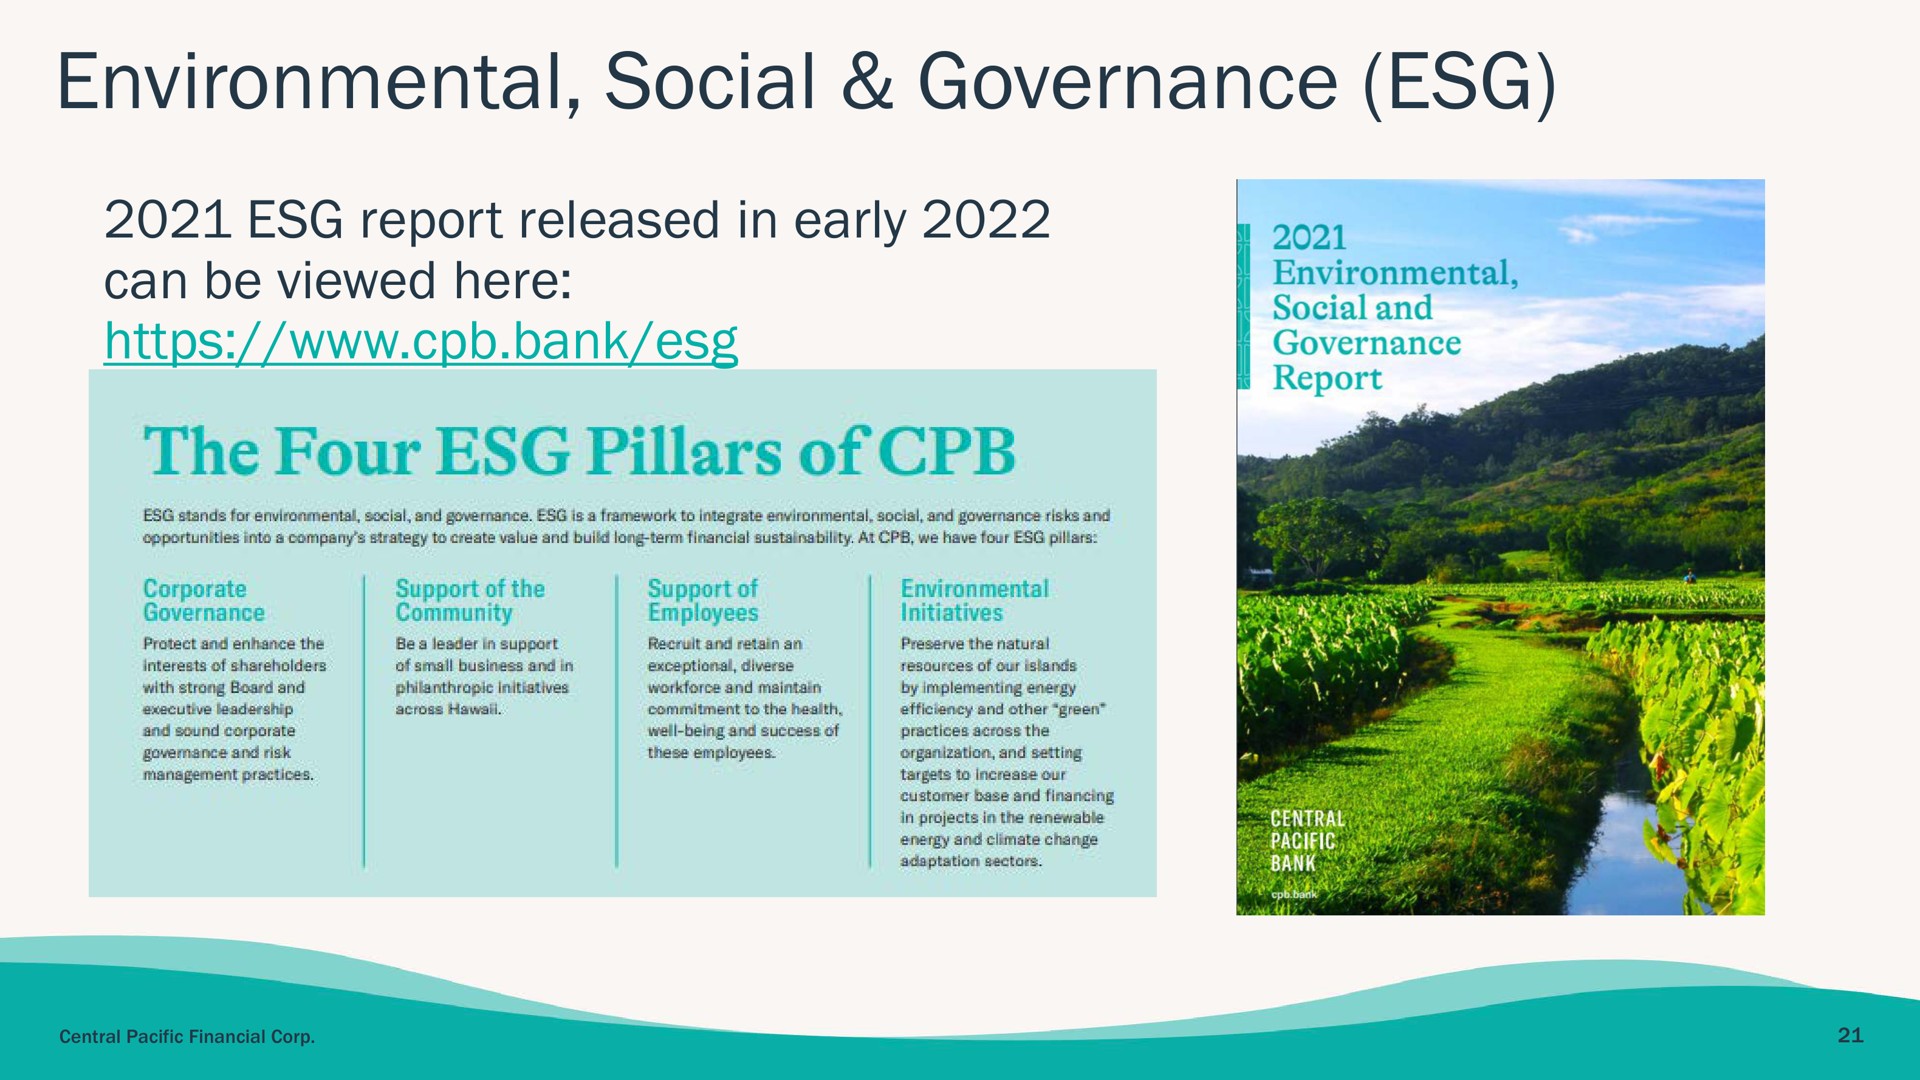 environmental social governance report released in early can be viewed here bank the four pillars of | Central Pacific Financial